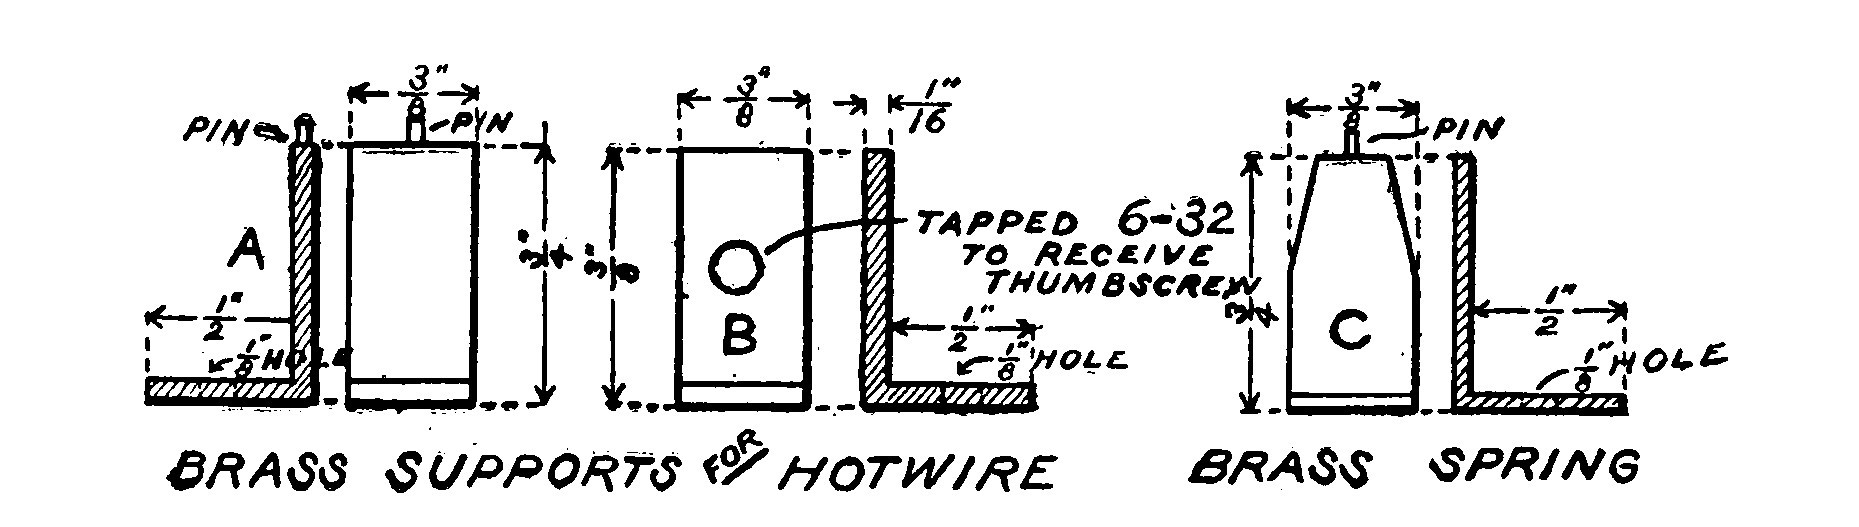 Fig. 83. Details of "Hot Wire" Supports.